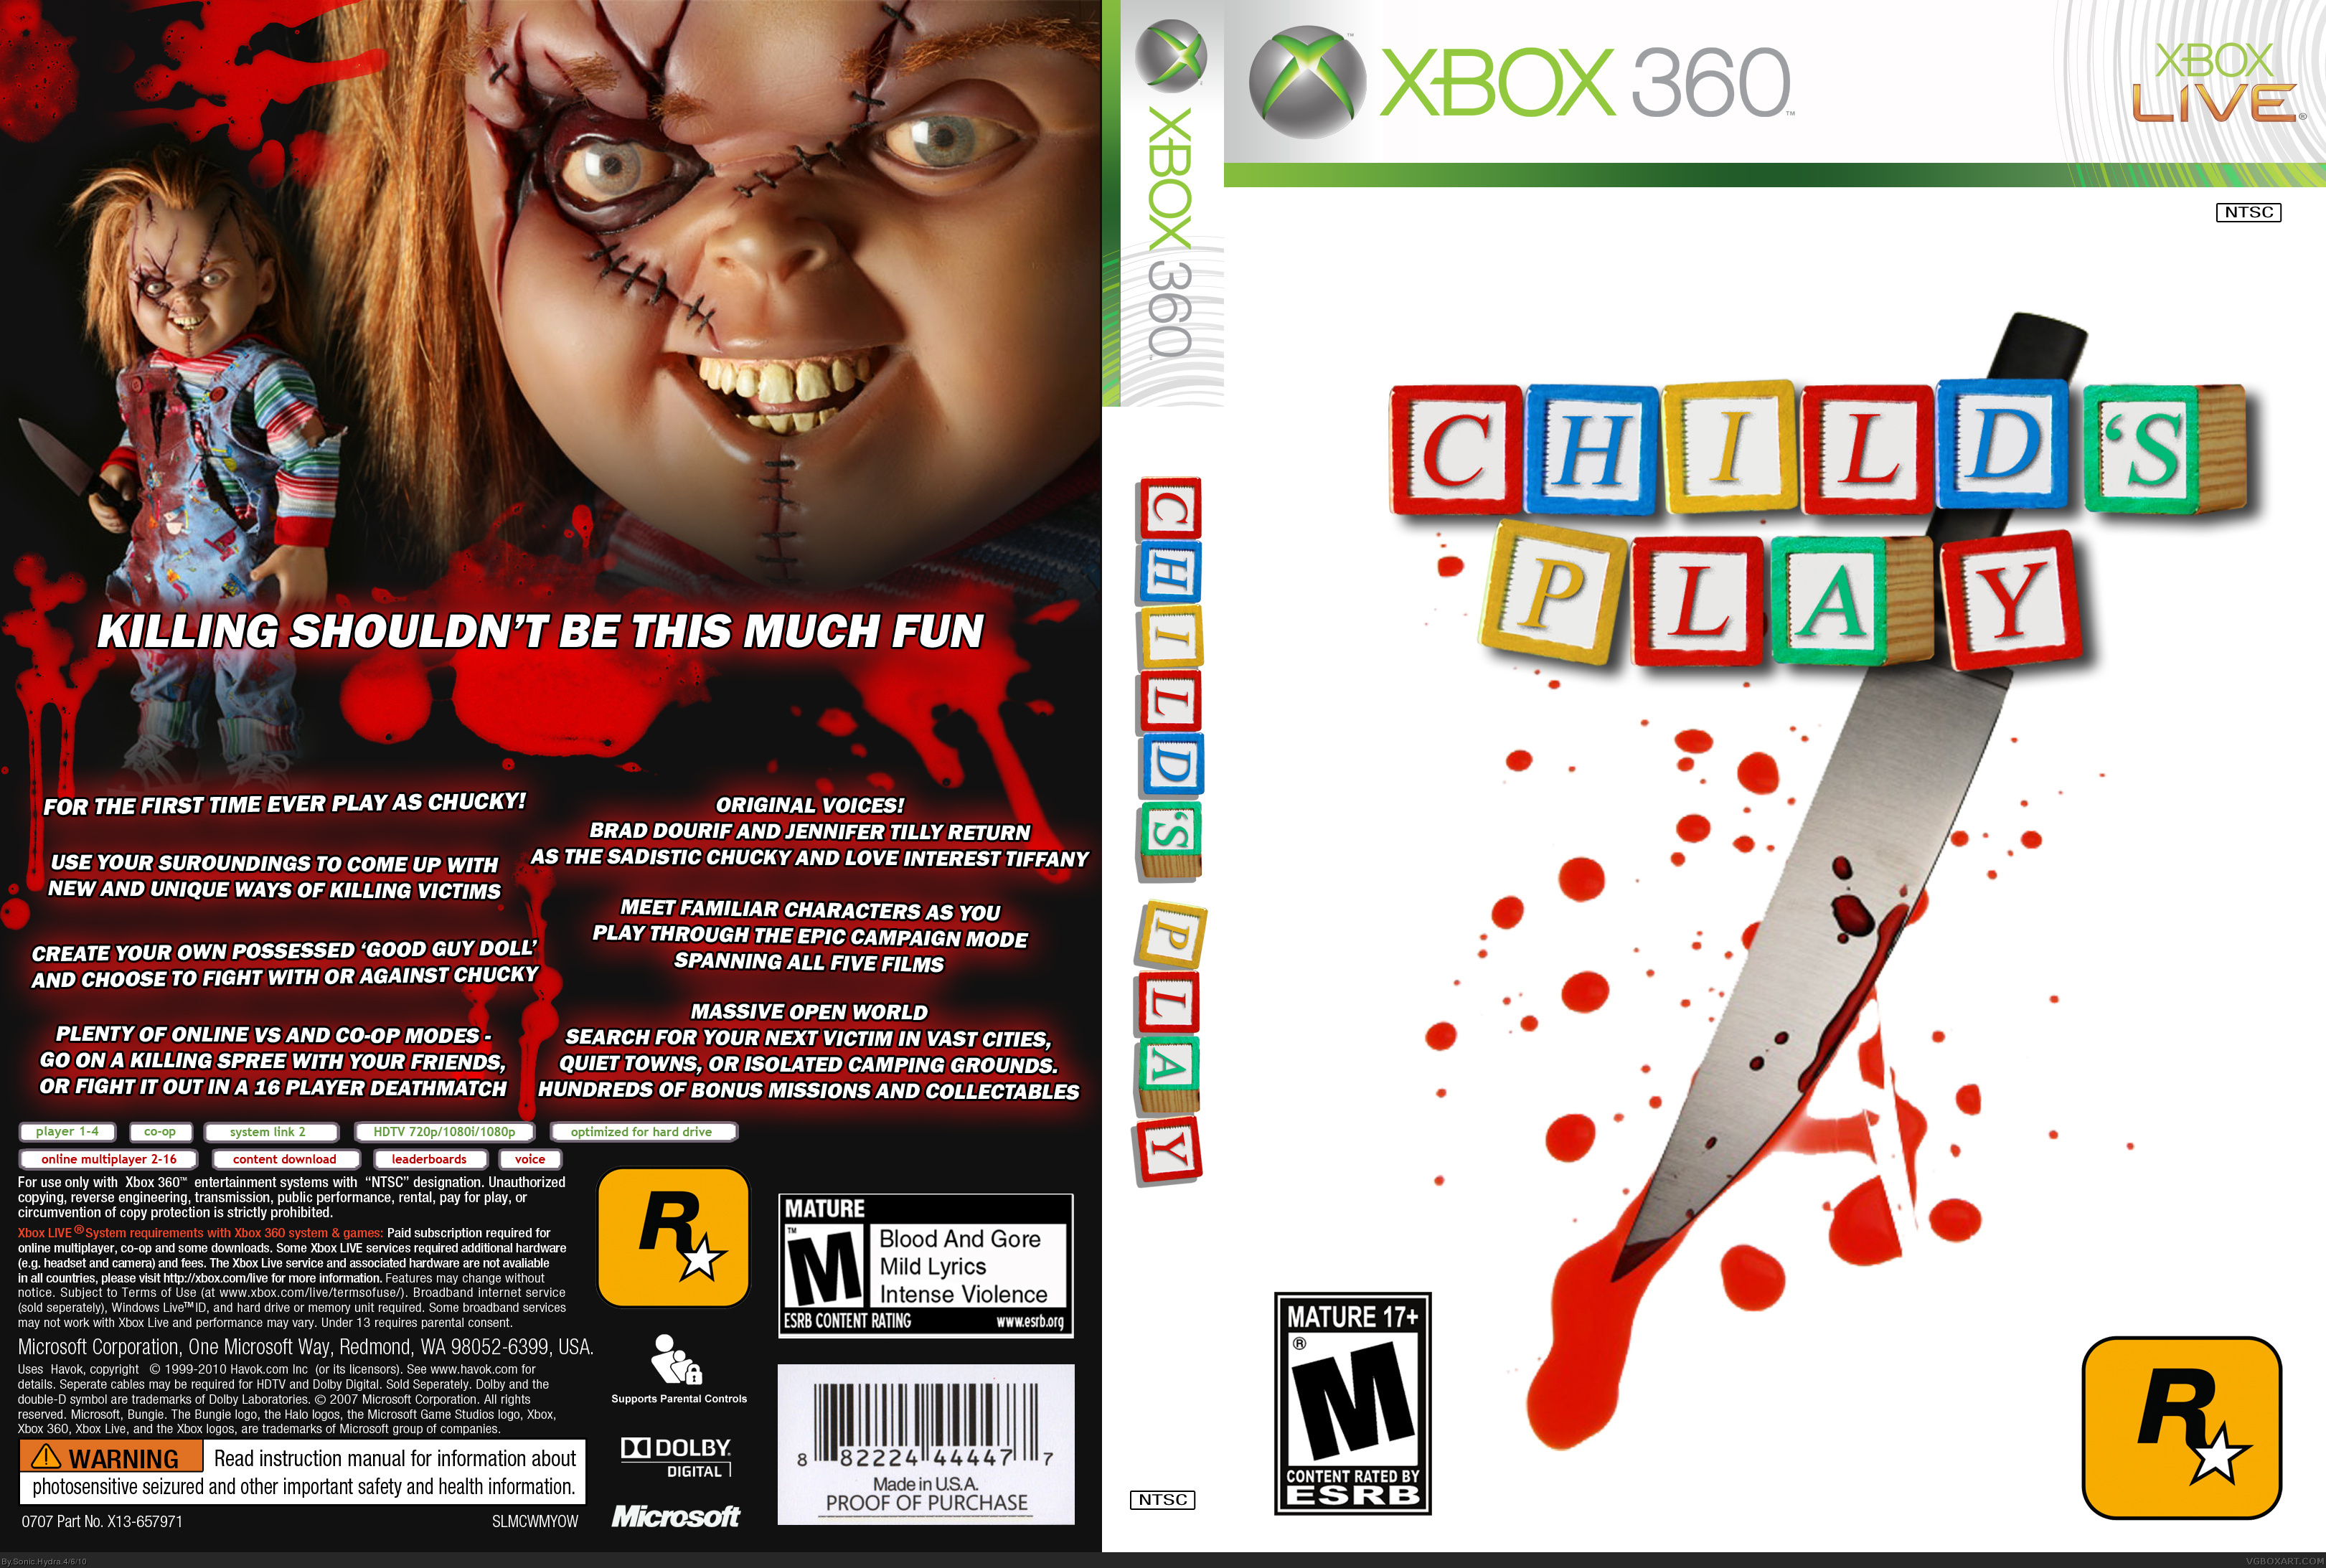 Child's Play box cover